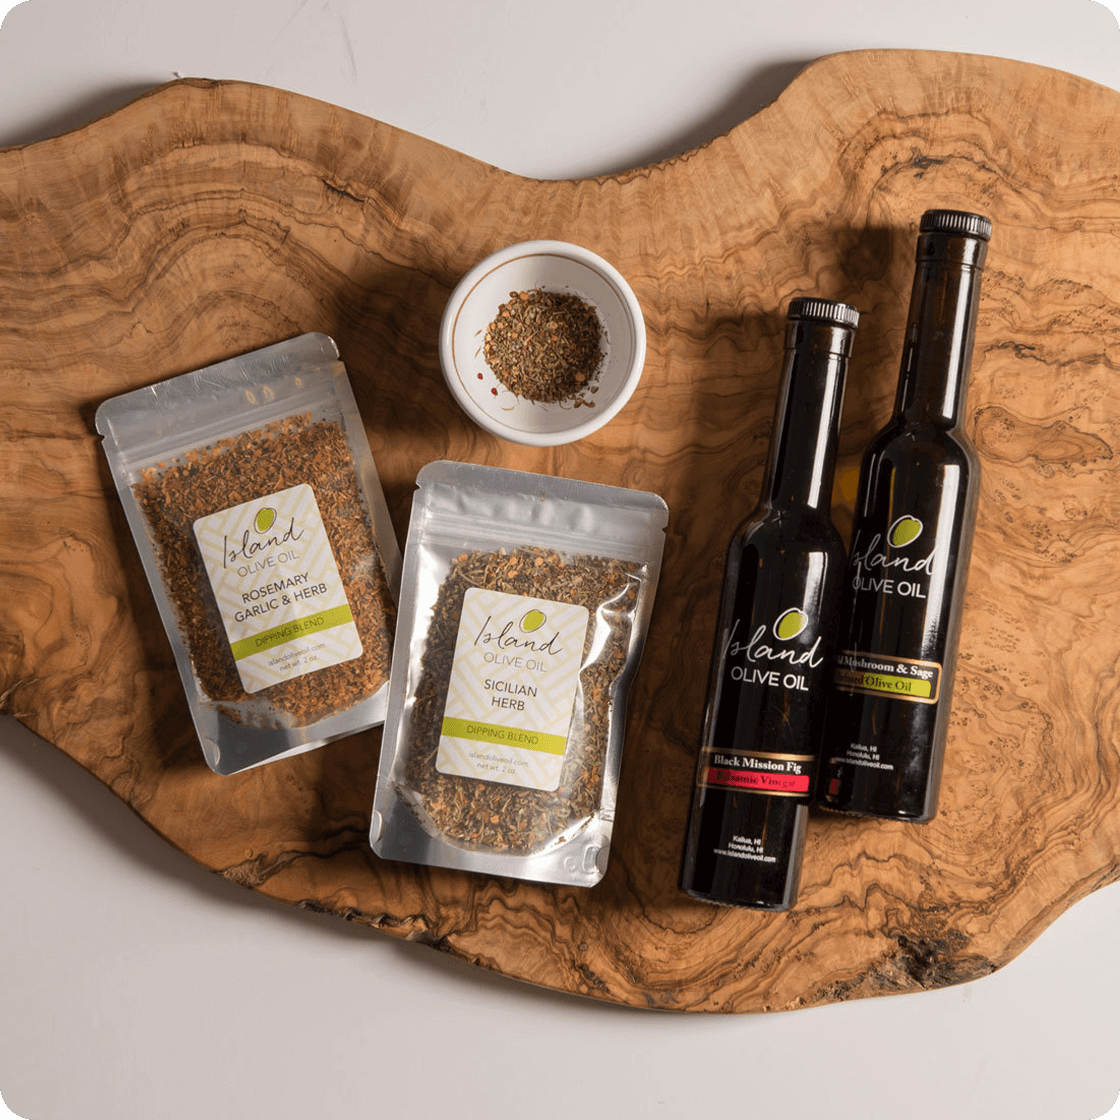 How Island Olive Oil uses Lifecycle Stages and automation to deliver the boutique touch